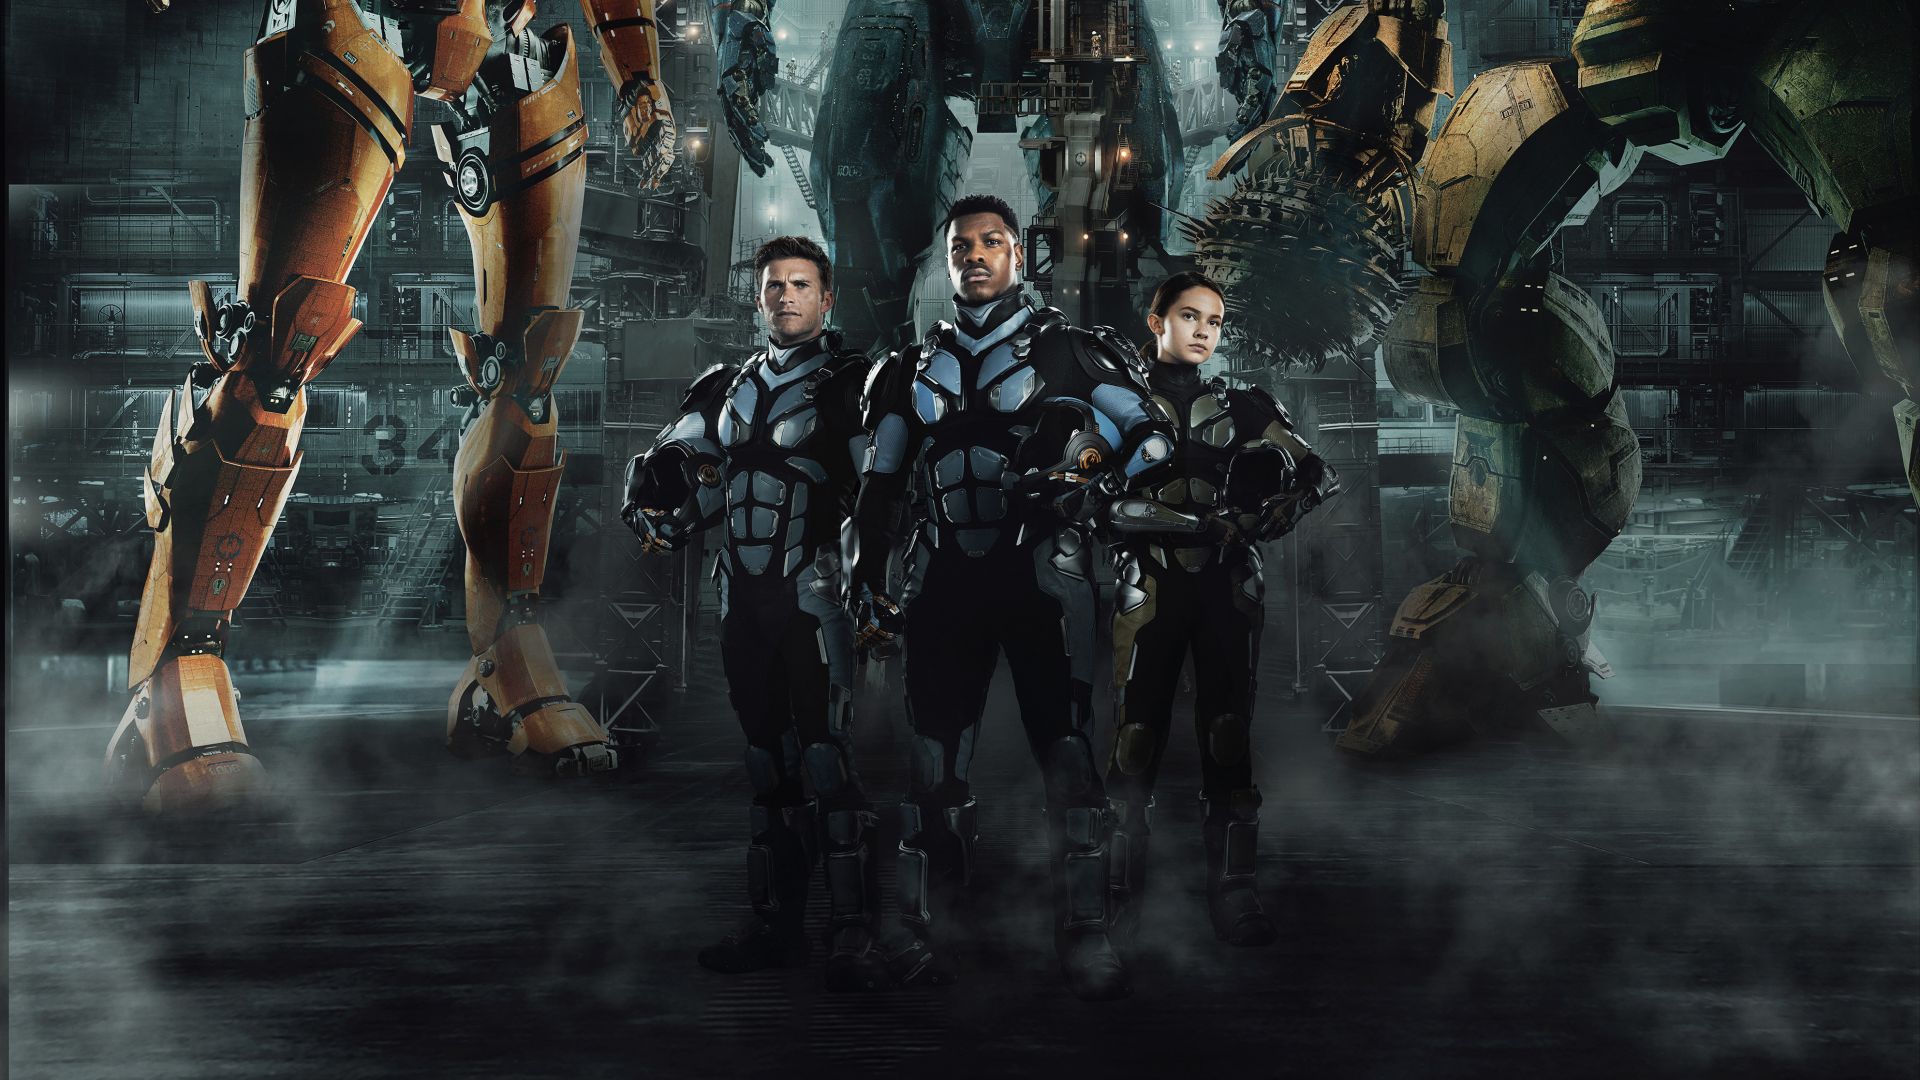 Cailee Spaeny In Pacific Rim Uprising Wallpapers